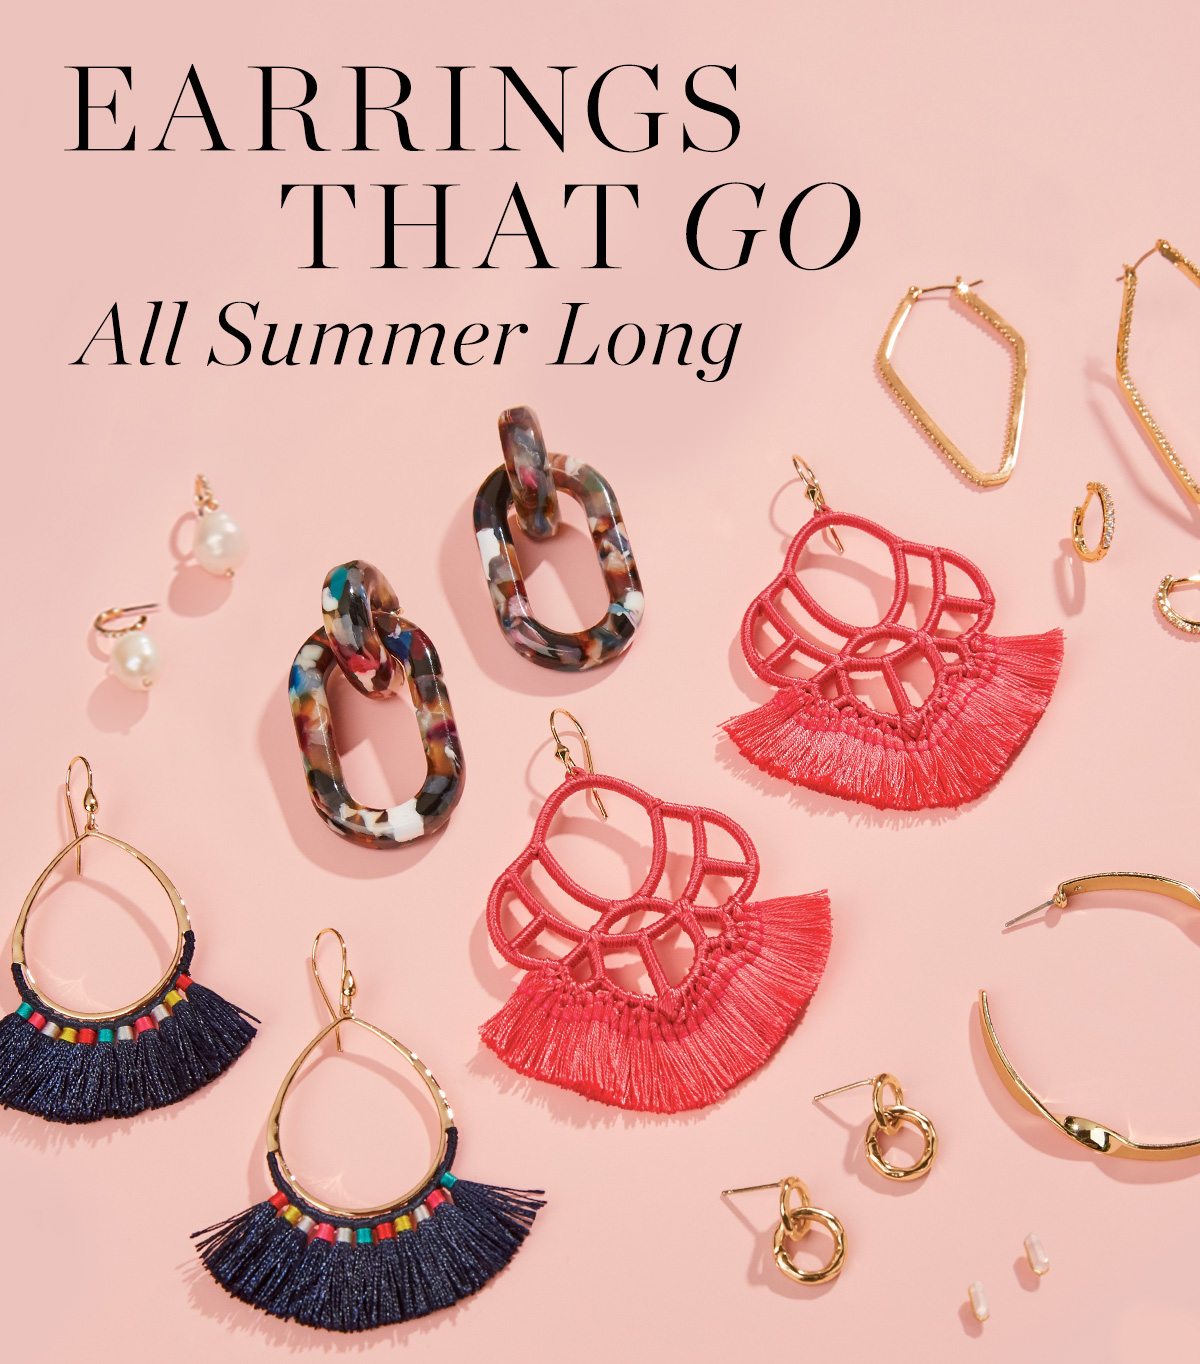 Shop Earrings - what's your style?